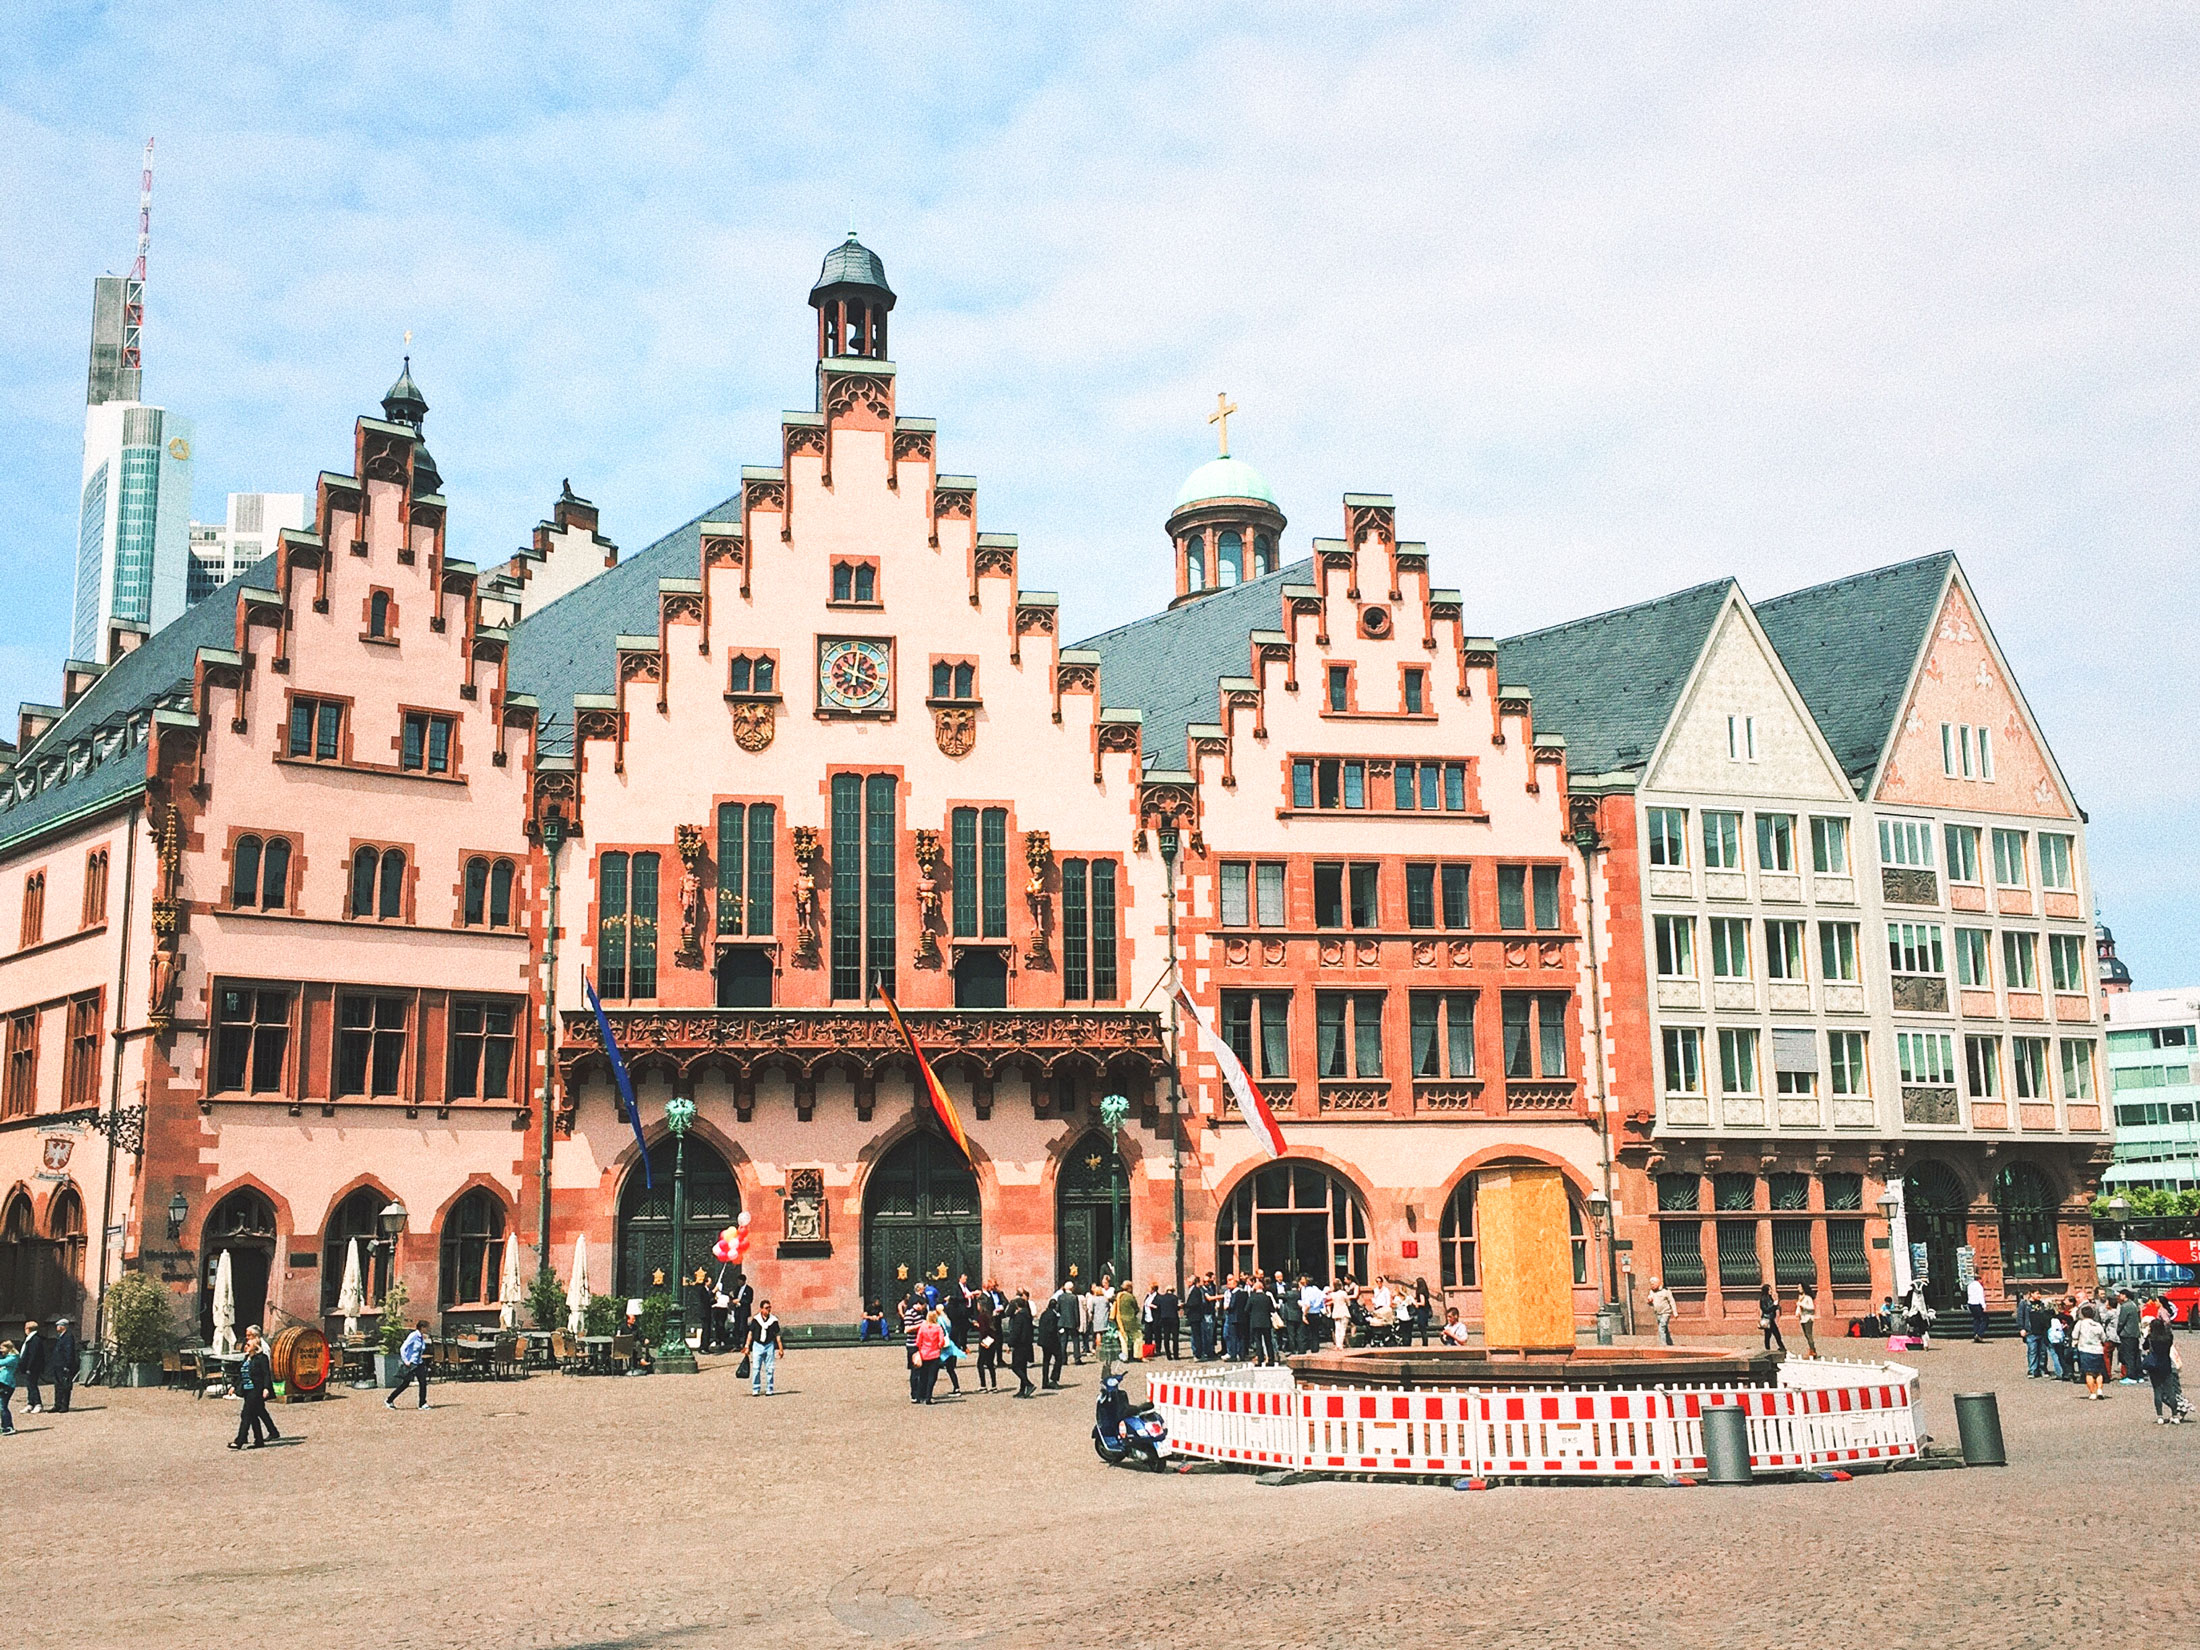 Front photo of the very traditional German Römerberg buildings. The roofs are block square constructed and the front of the buildings are light pink and dark orange. People are walking in the square in front, and there is a fountain there.